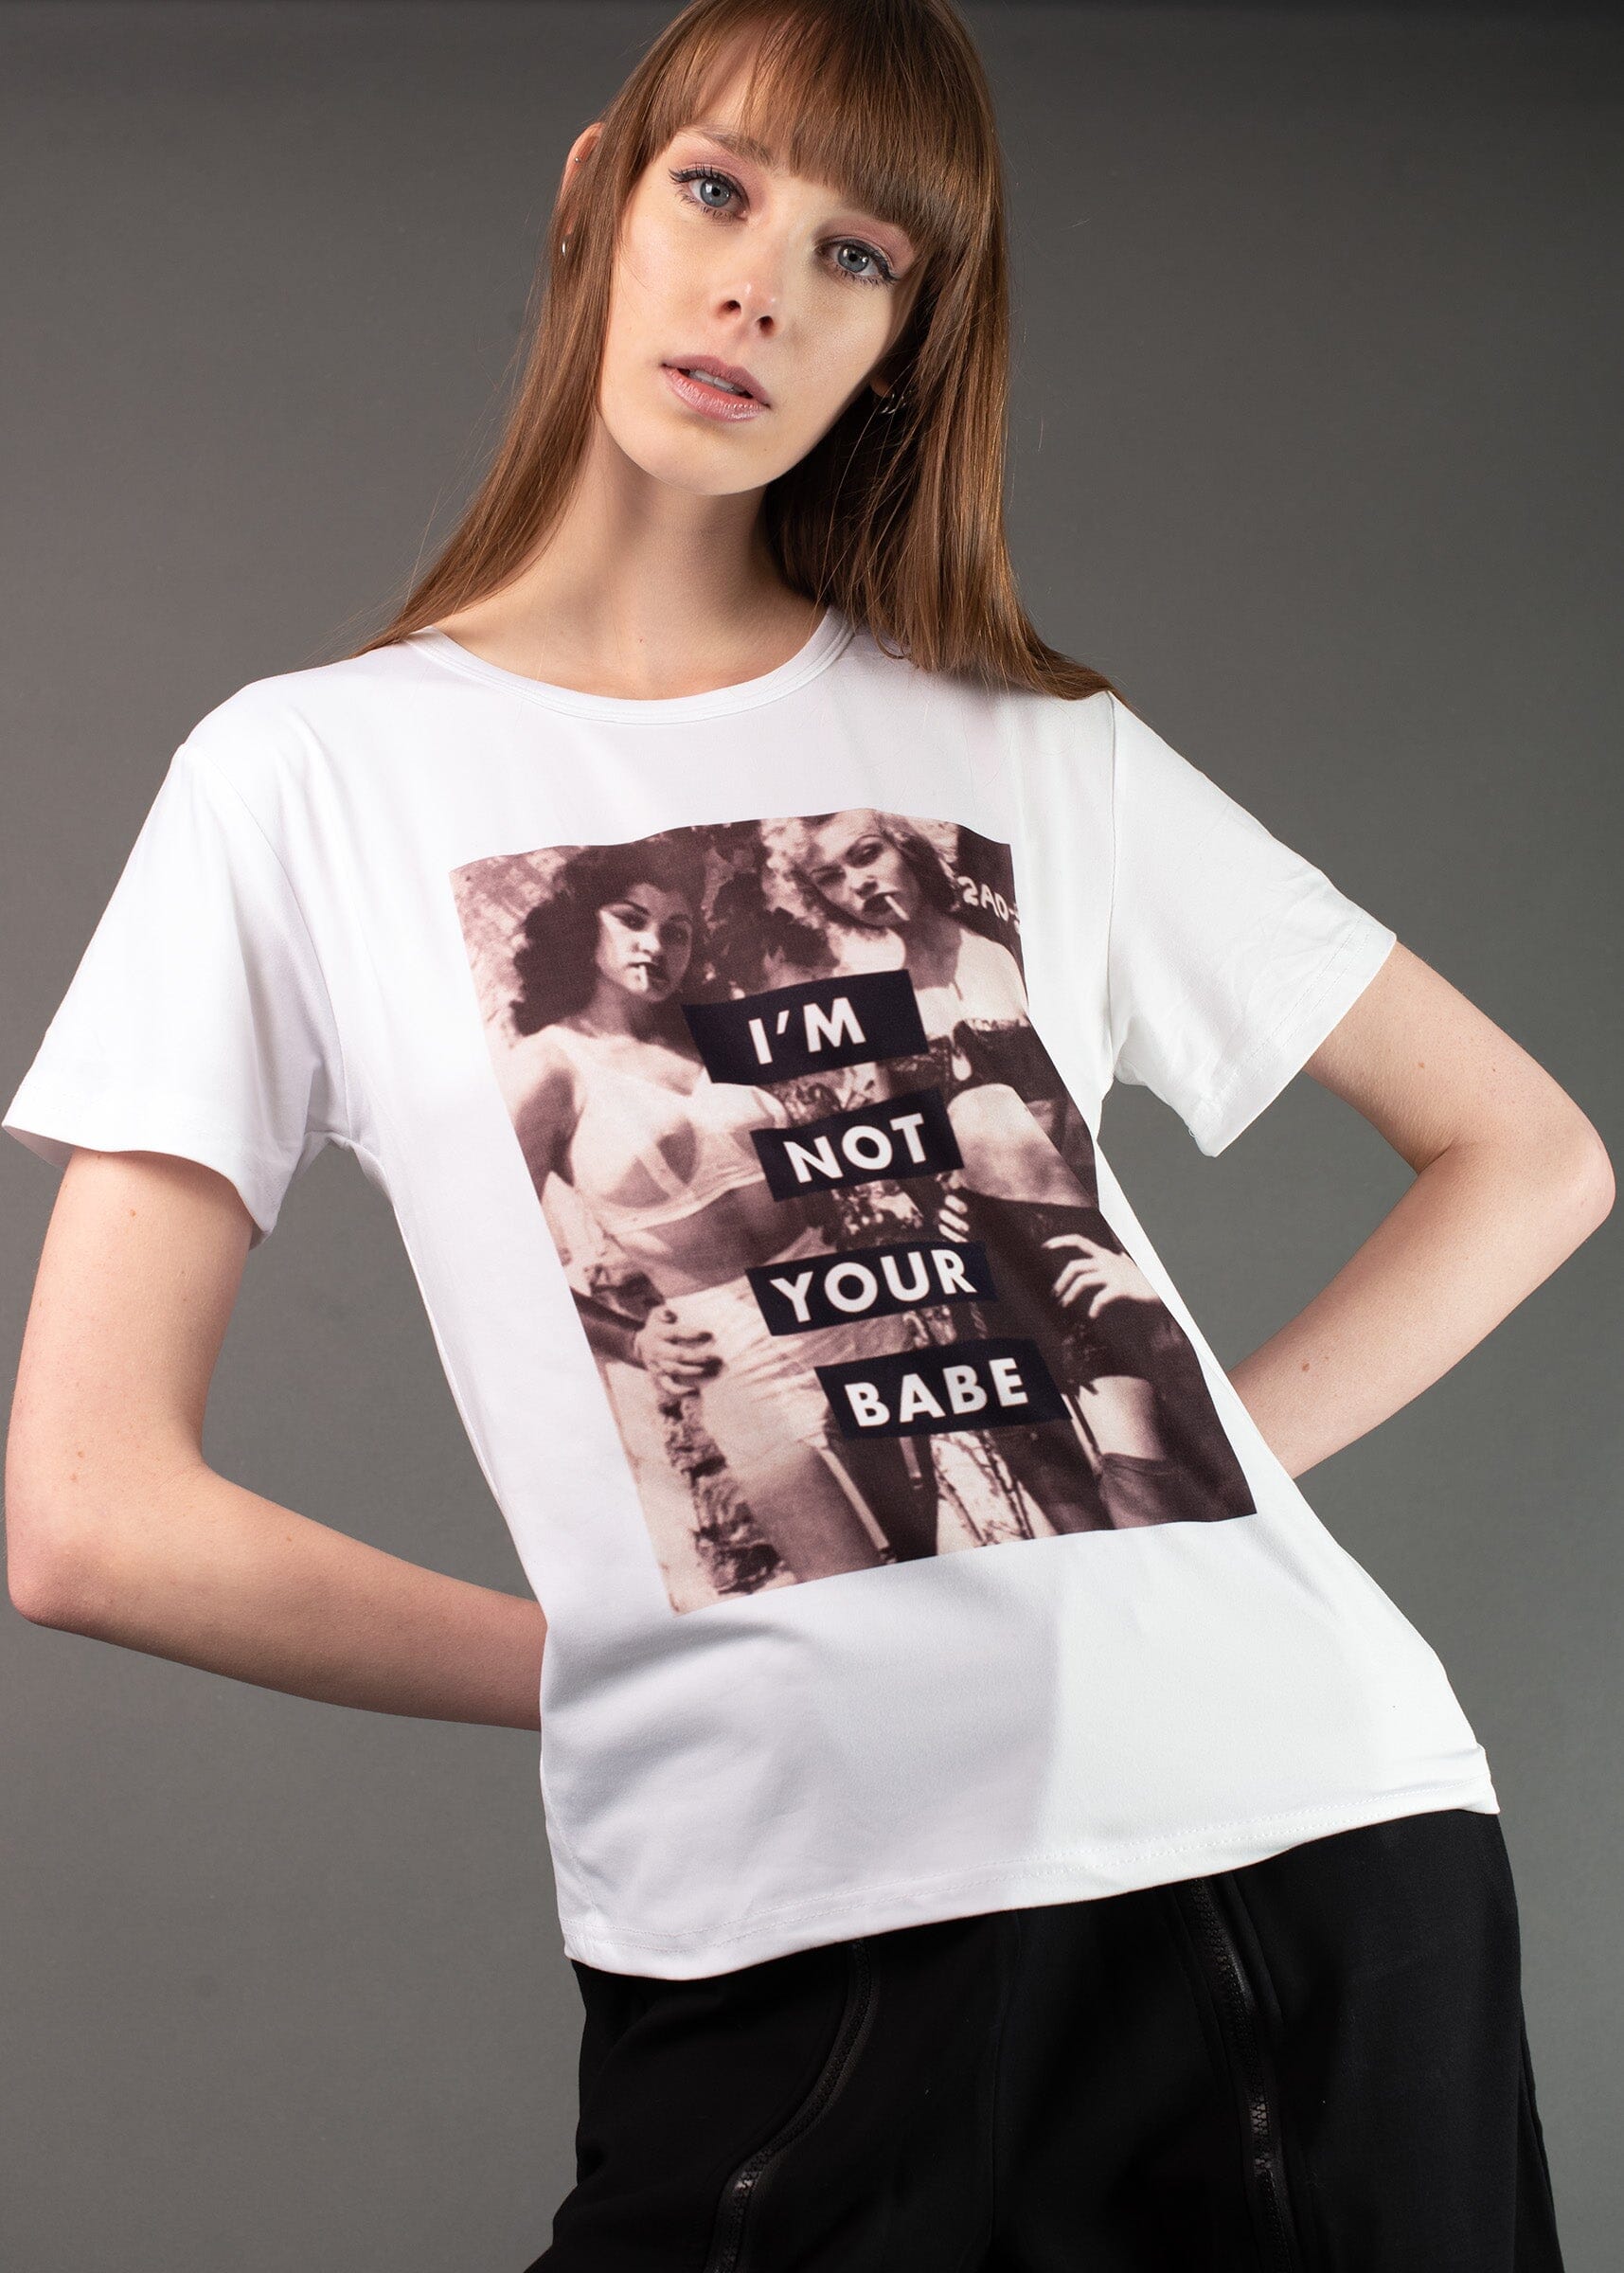 Not Your Babe Graphic Tee Tees Kate Hewko 